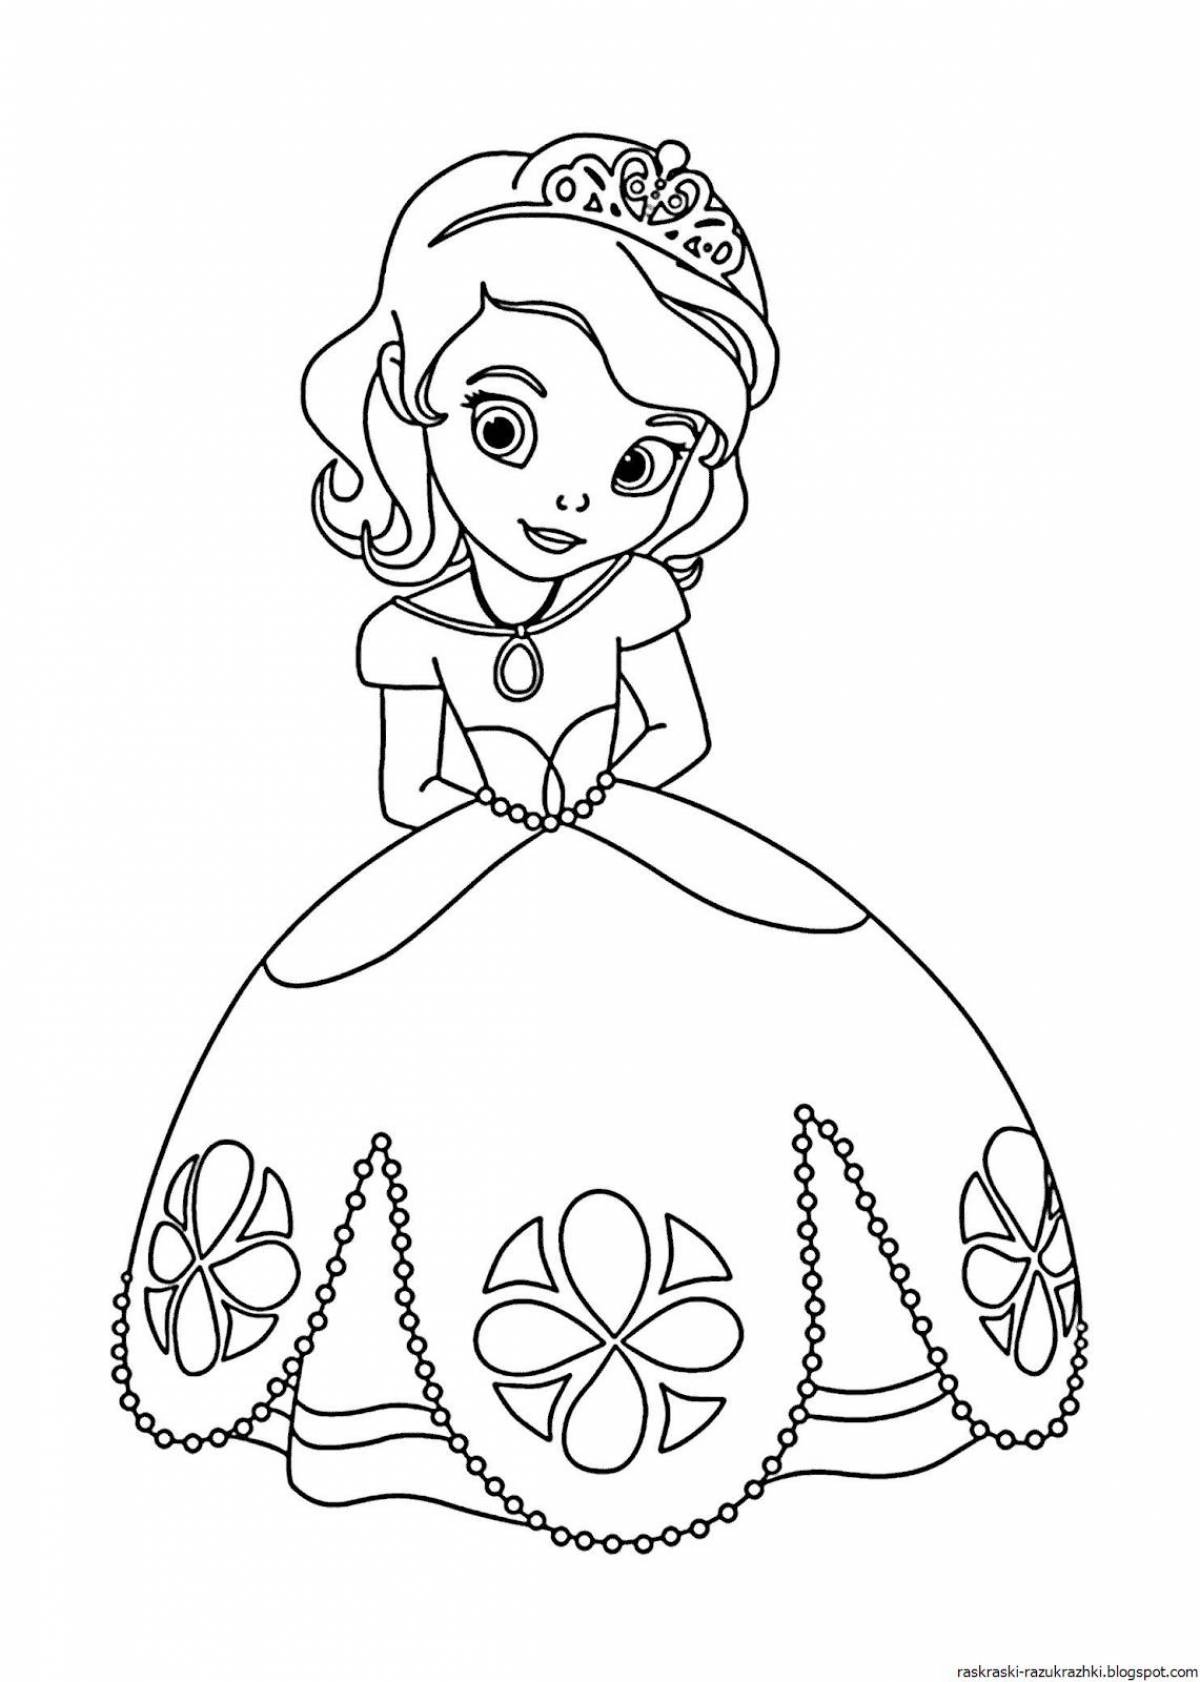 Amazing princess coloring book for kids 5-6 years old